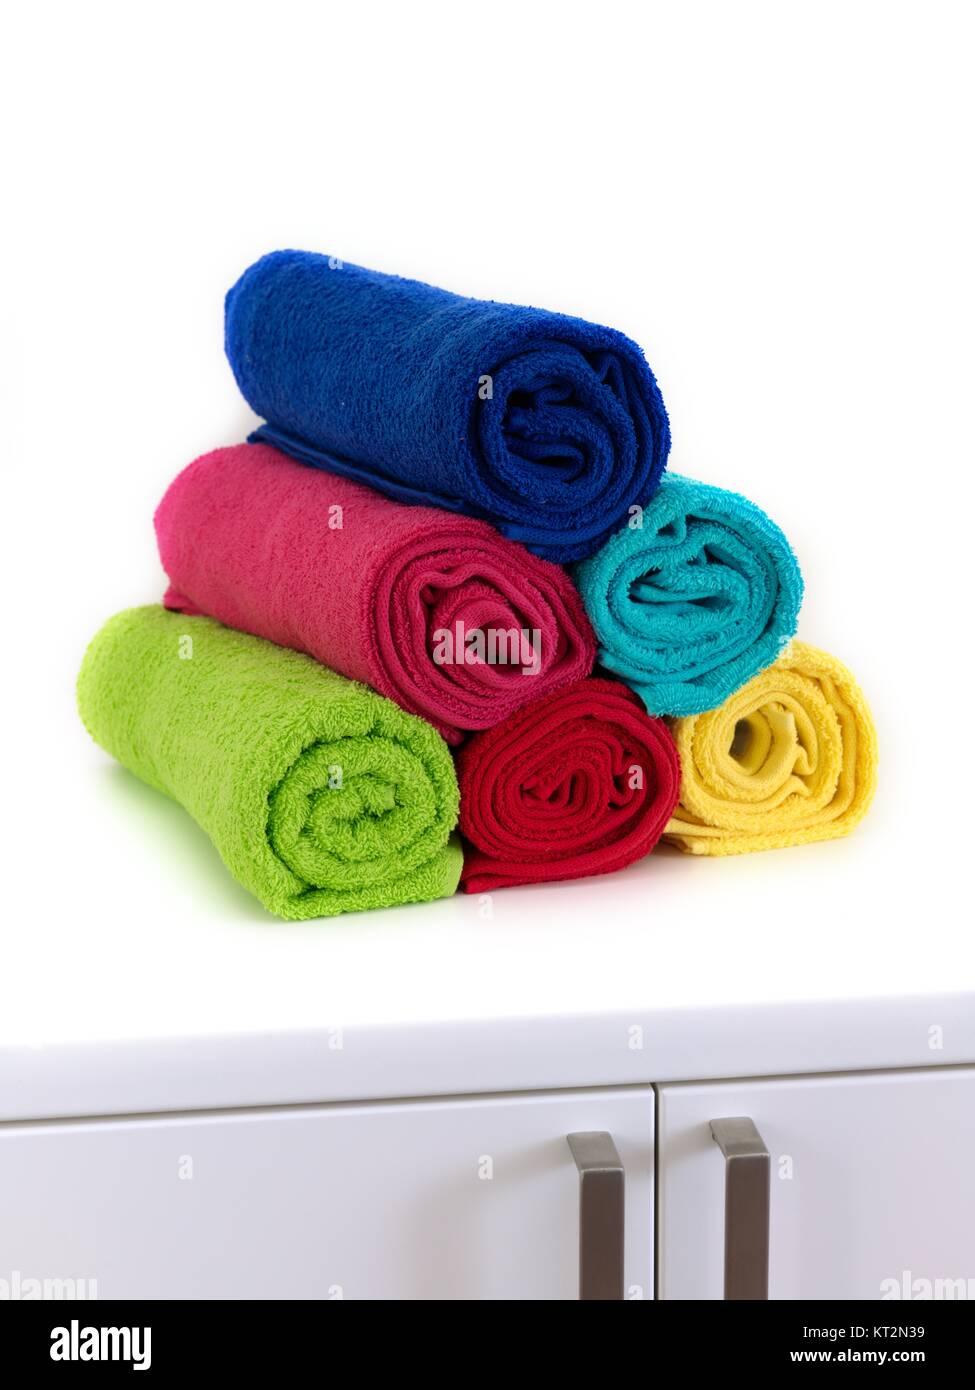 https://c8.alamy.com/comp/KT2N39/colored-bathroom-towels-isolated-against-a-white-background-KT2N39.jpg